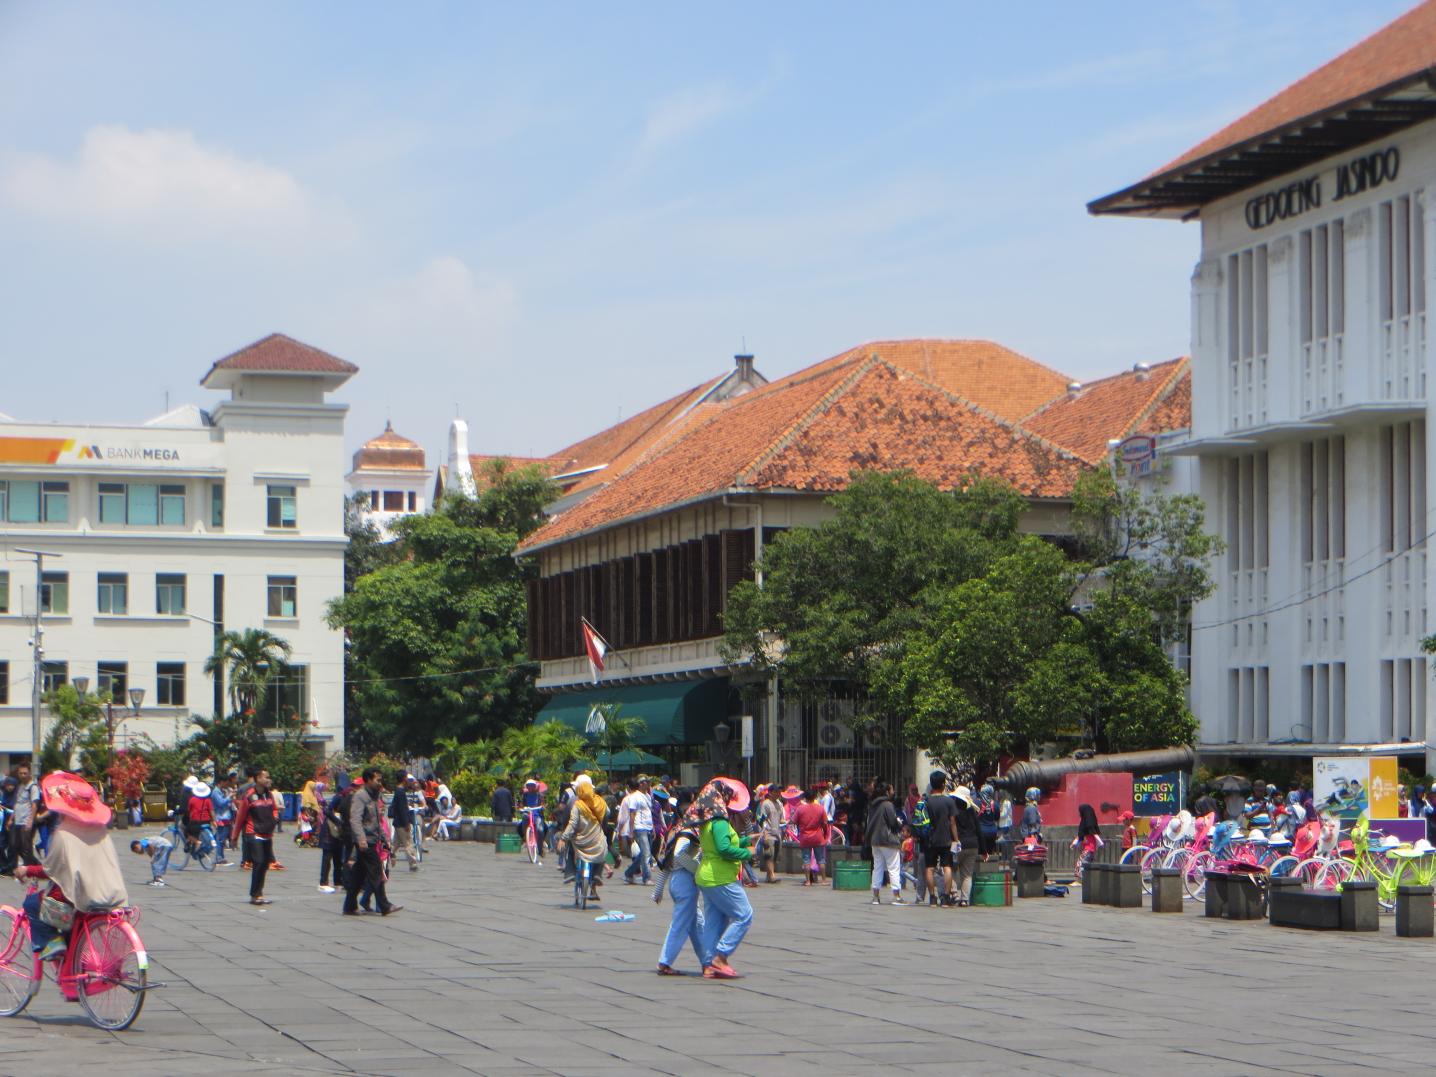 a 2018 photo of Fatahillah Square in Kota Tua, the historical inner city of Jakarta, which shows colonial buildings and many people hanging out and walking around